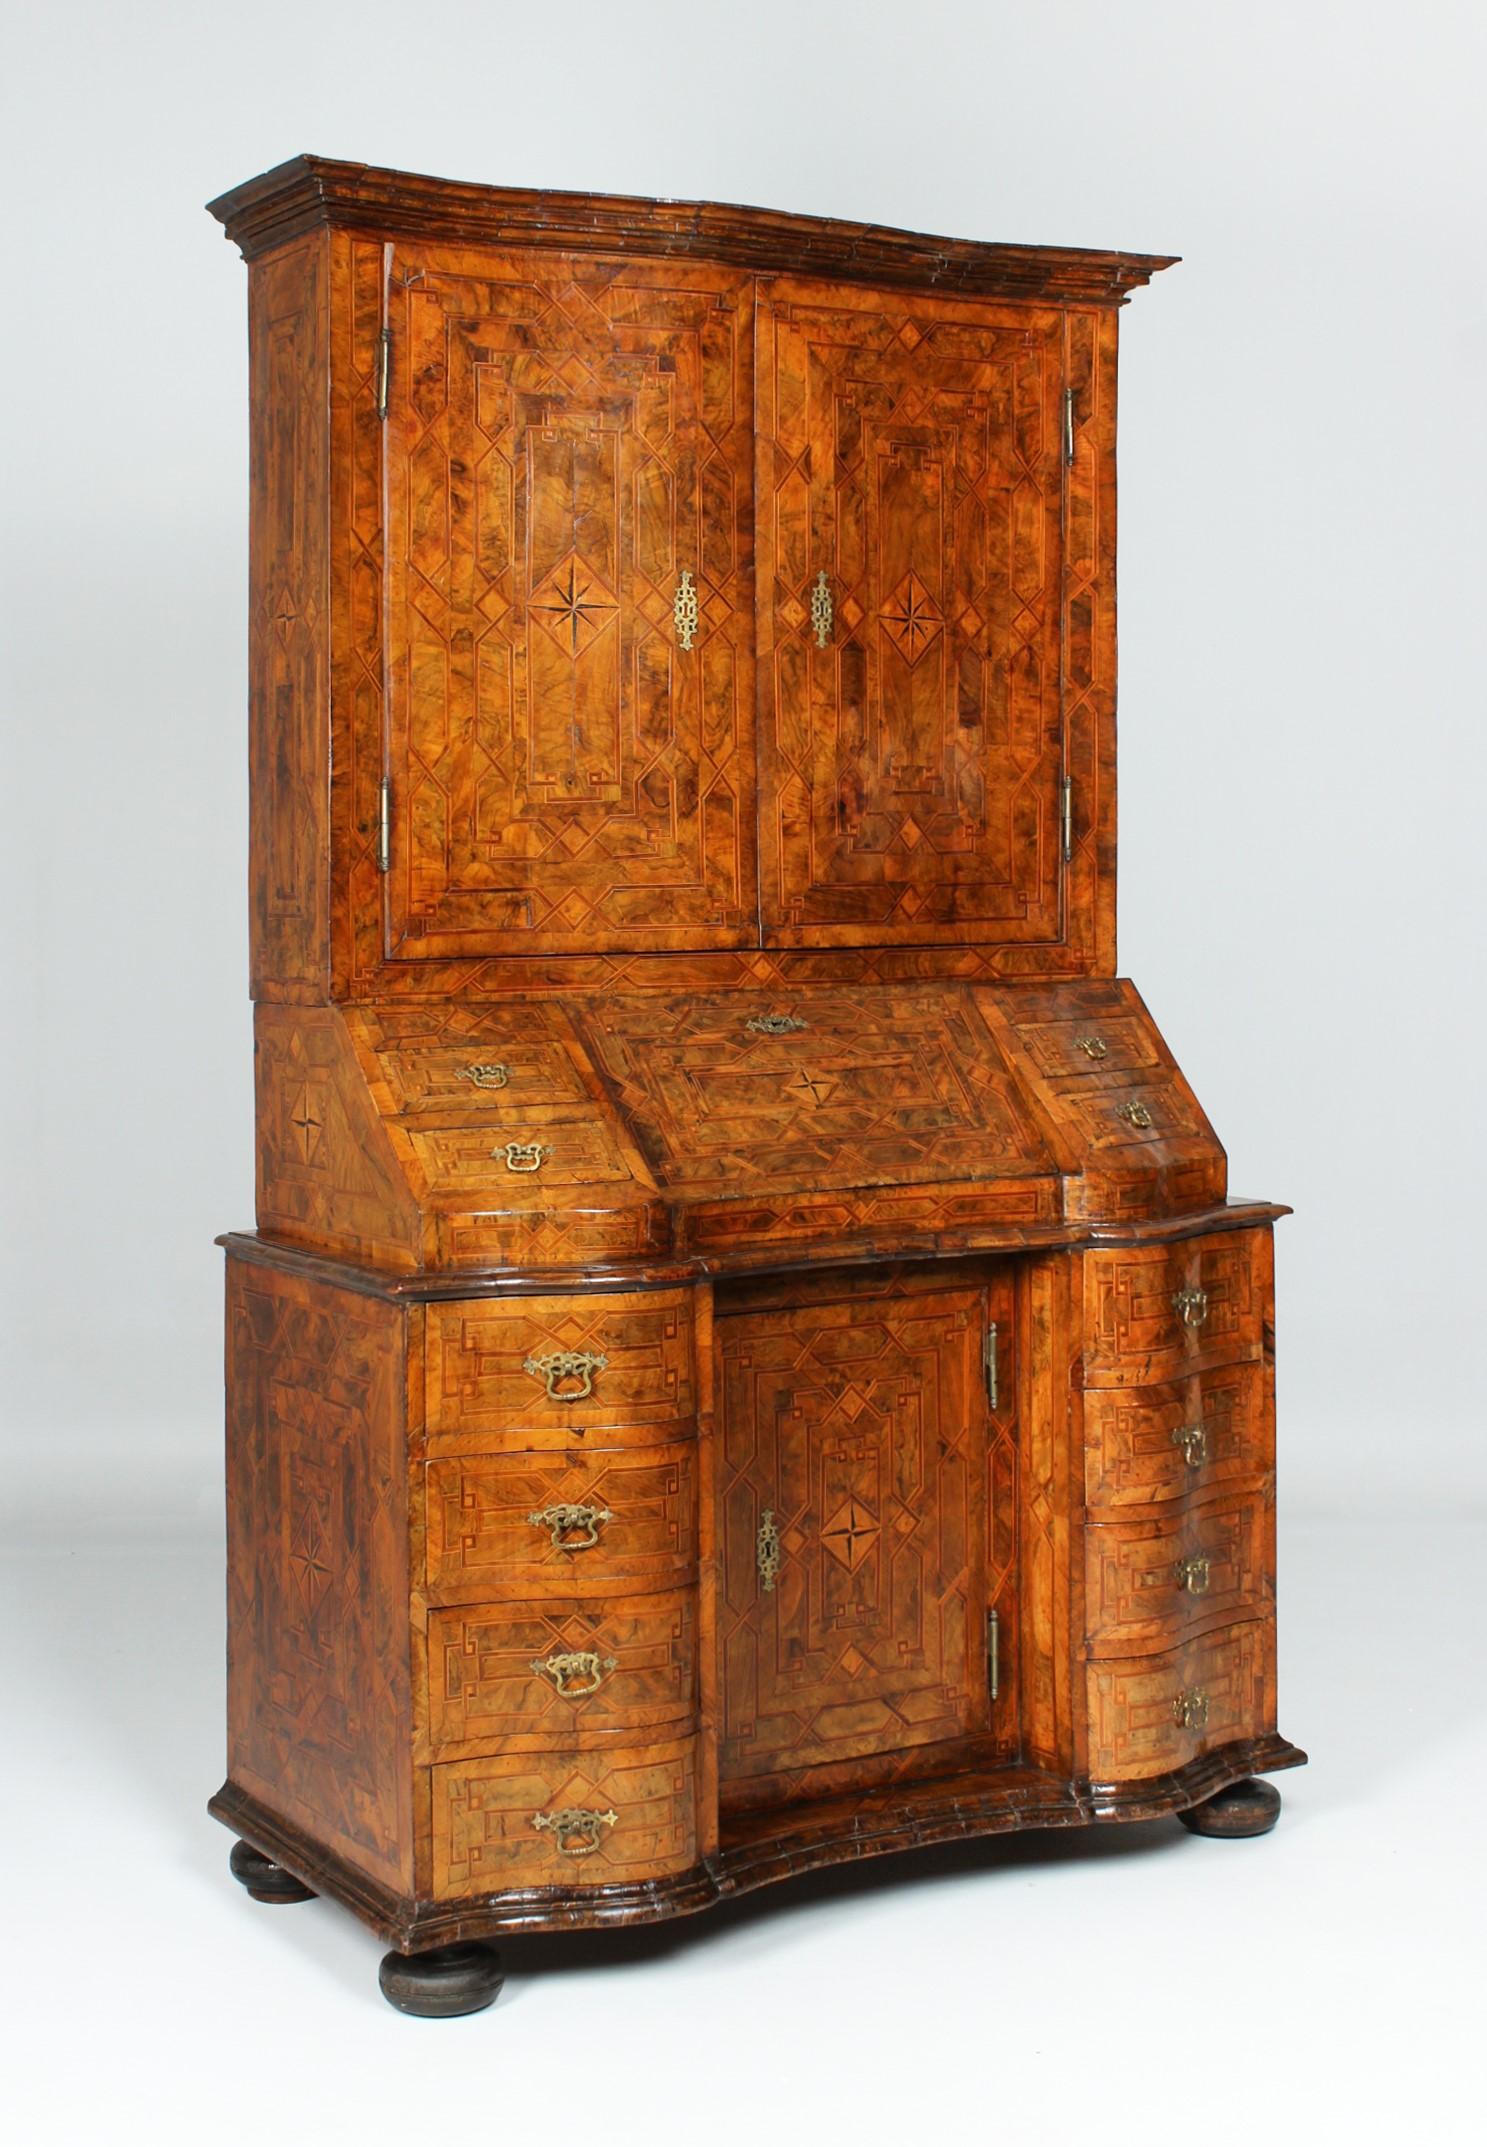 Baroque secretary with impressive marquetry

Southwest Germany
Walnut a.o.
around 1750

Dimensions: H x W x D: 211 x 127 x 65 cm

Description:
Antique top-mounted secretary from the mid-18th century with exceptionally rich marquetry.

The base